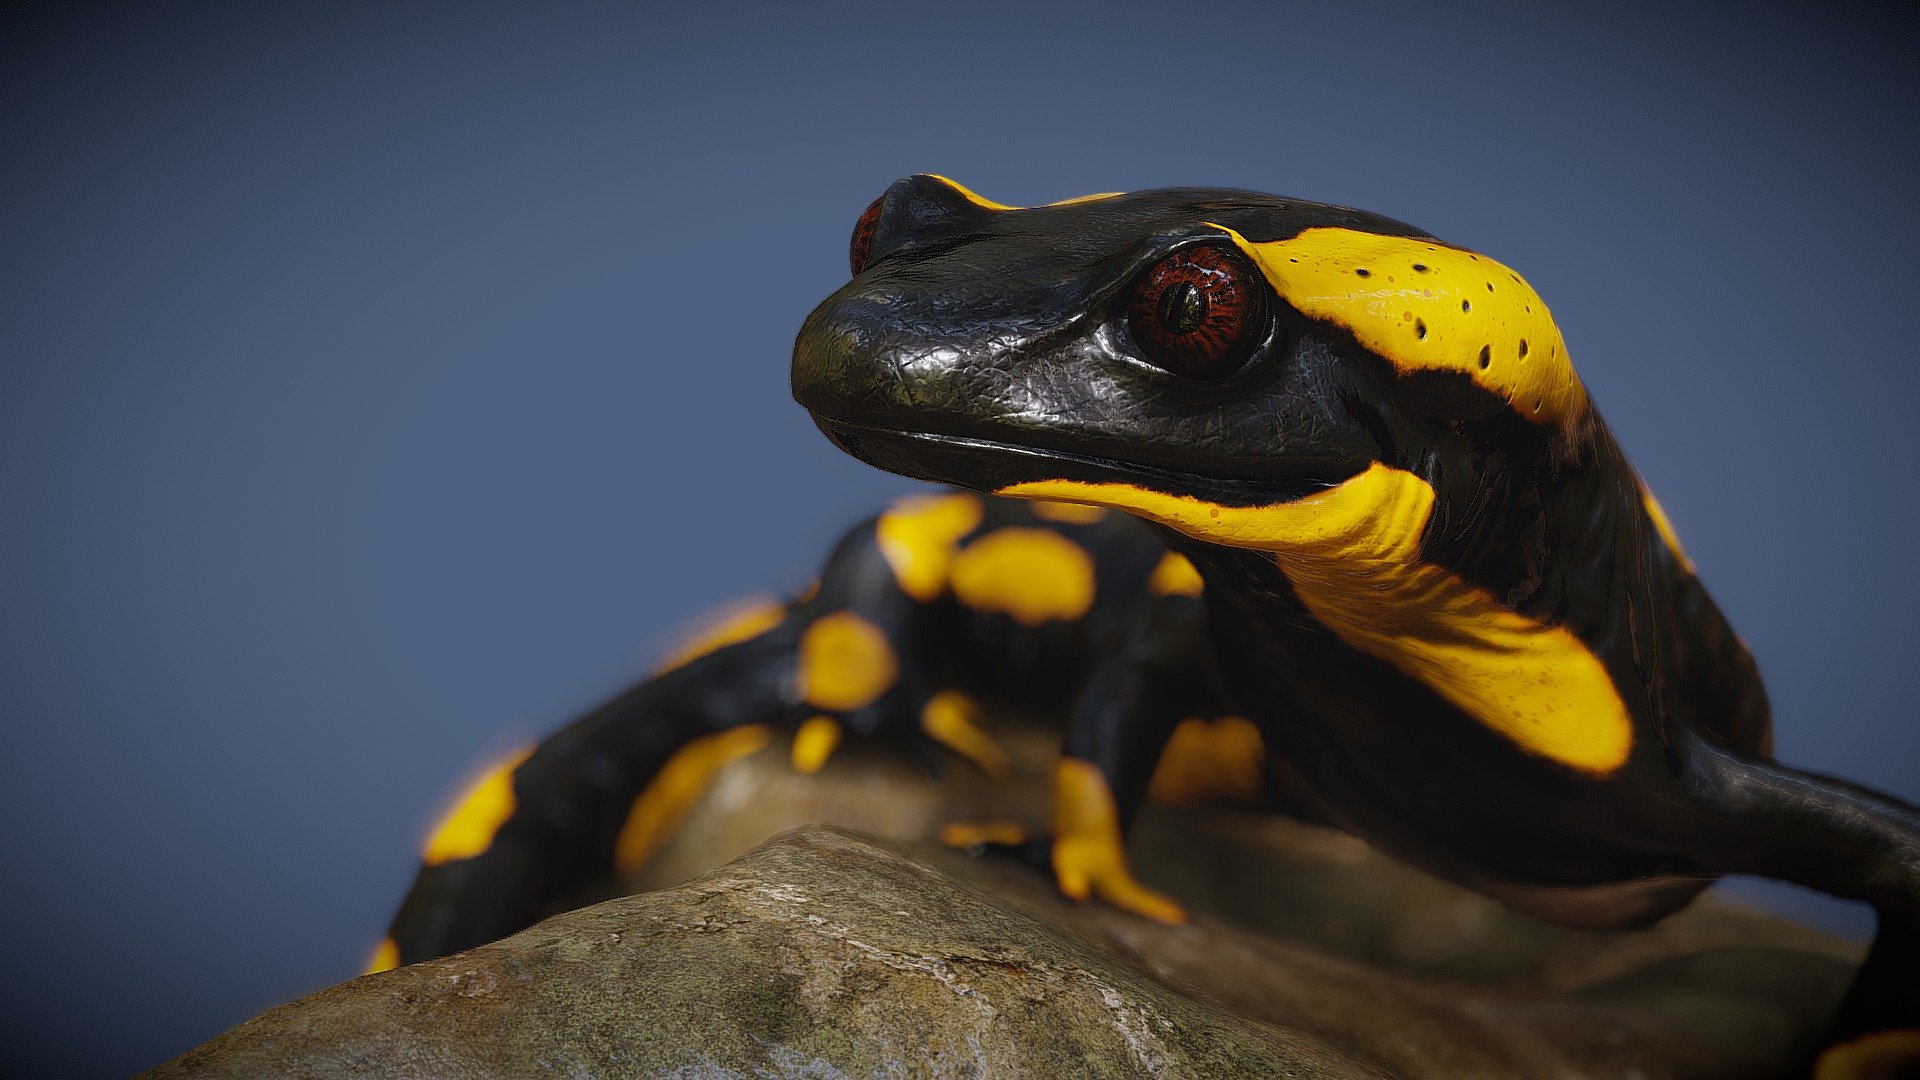 Small scene that I made with my Fire salamander

The Model is buyable here (Walk/Idles cycles animations + transitions)

You can check the video rendered in Cycles here https://www.youtube.com/watch?v=z82z0zBhI-o&amp;amp;ab_channel=Zacxophone
 - Salamander - 3D model by Zacxophone 3d model